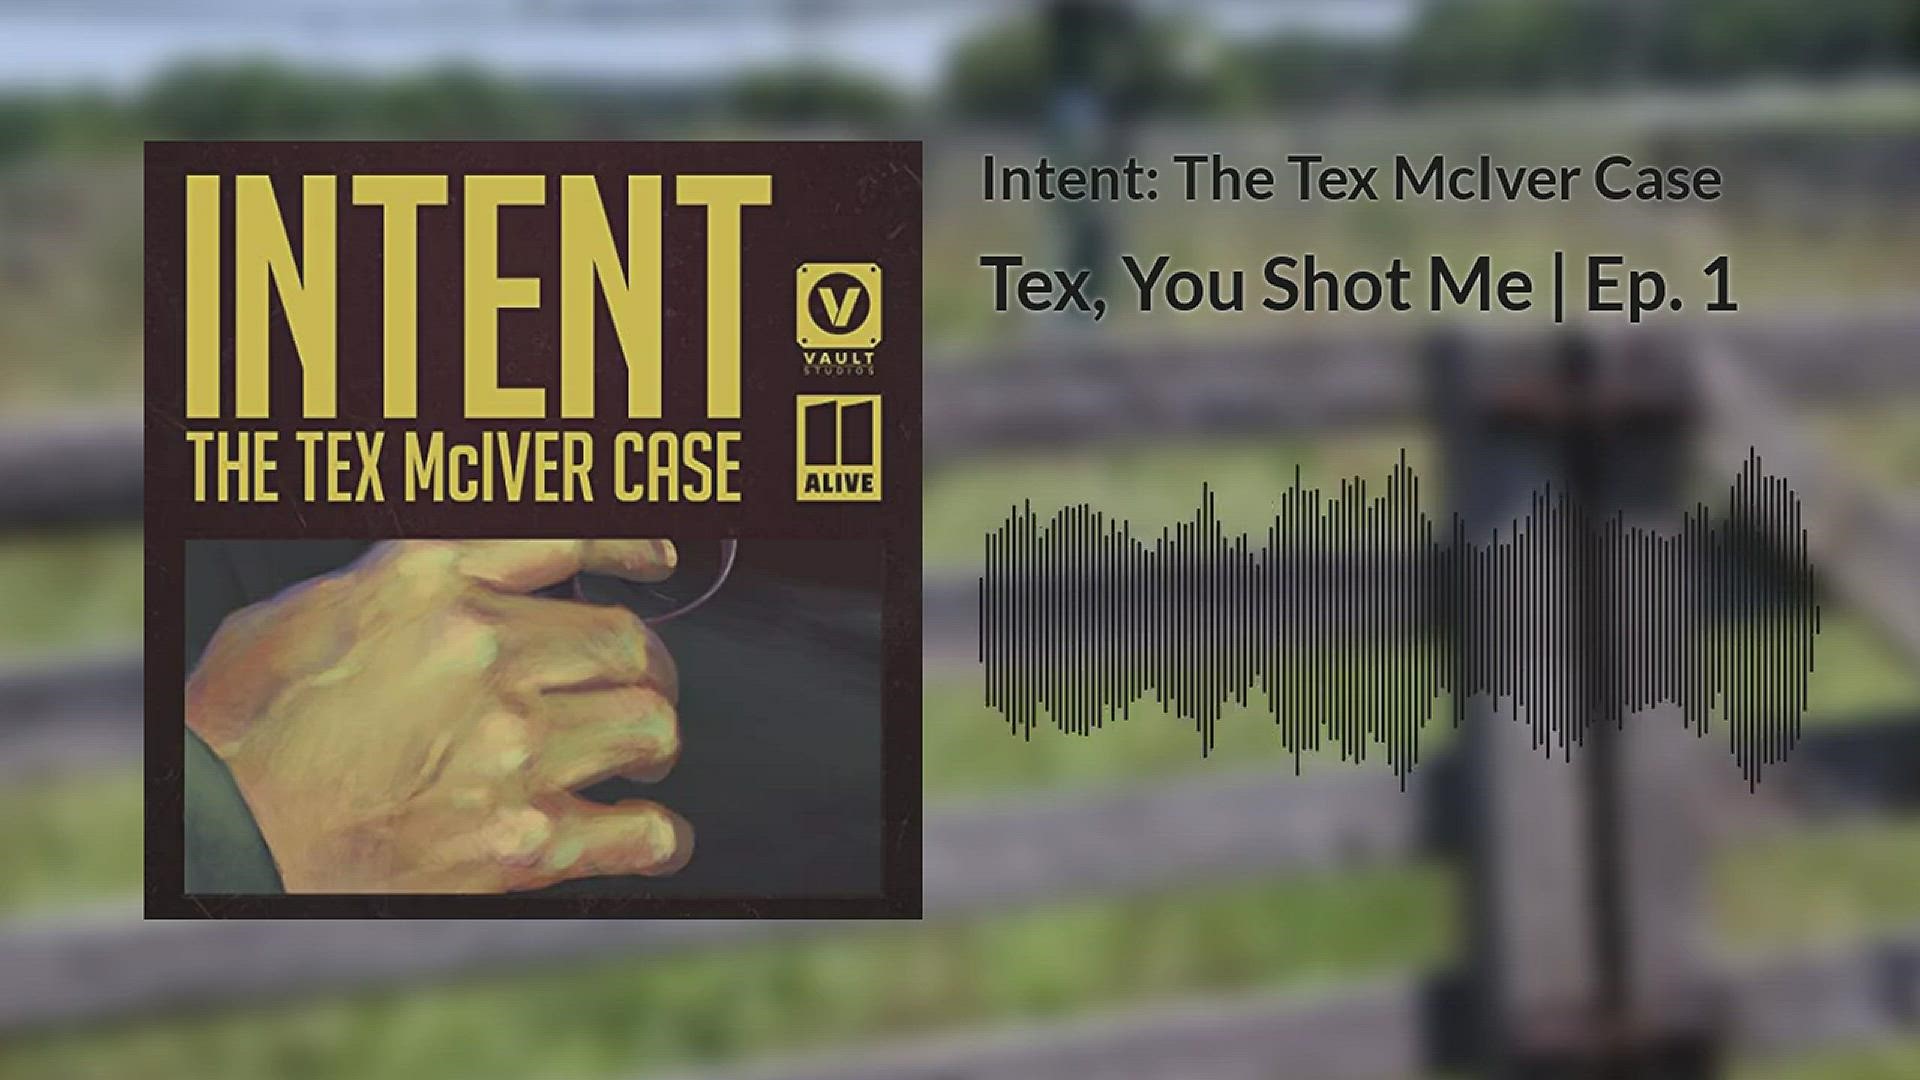 Ep. 1 | Tex, You Shot Me -- Kaitlyn Ross investigates the case of Diane McIver, a wealthy businesswoman who was shot in the back by her husband of 11 years.